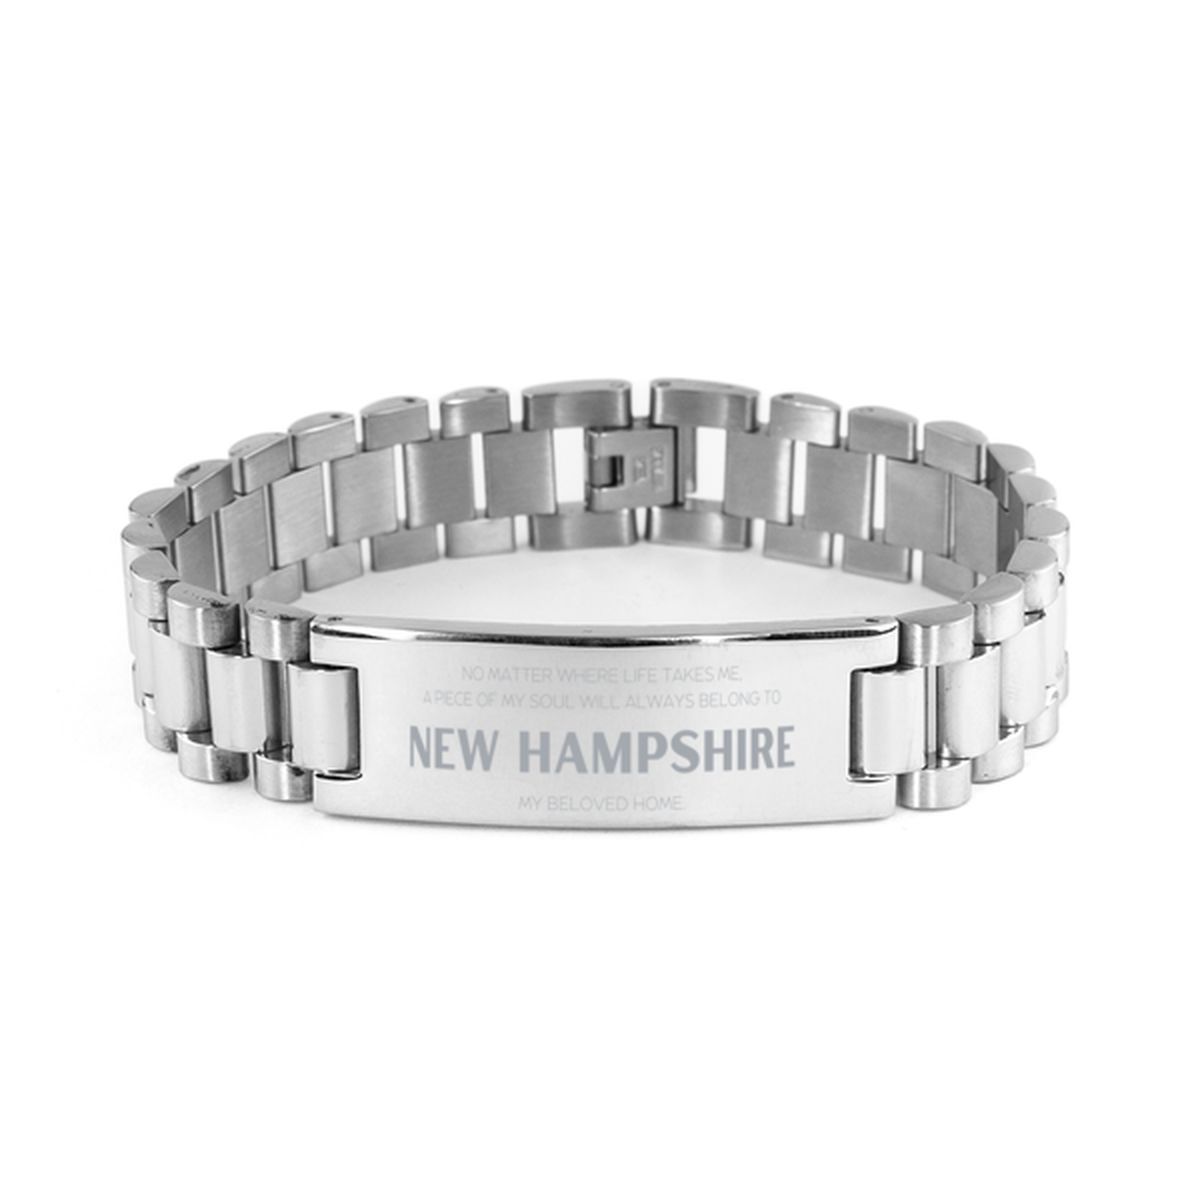 Love New Hampshire State Gifts, My soul will always belong to New Hampshire, Proud Ladder Stainless Steel Bracelet, Birthday Unique Gifts For New Hampshire Men, Women, Friends